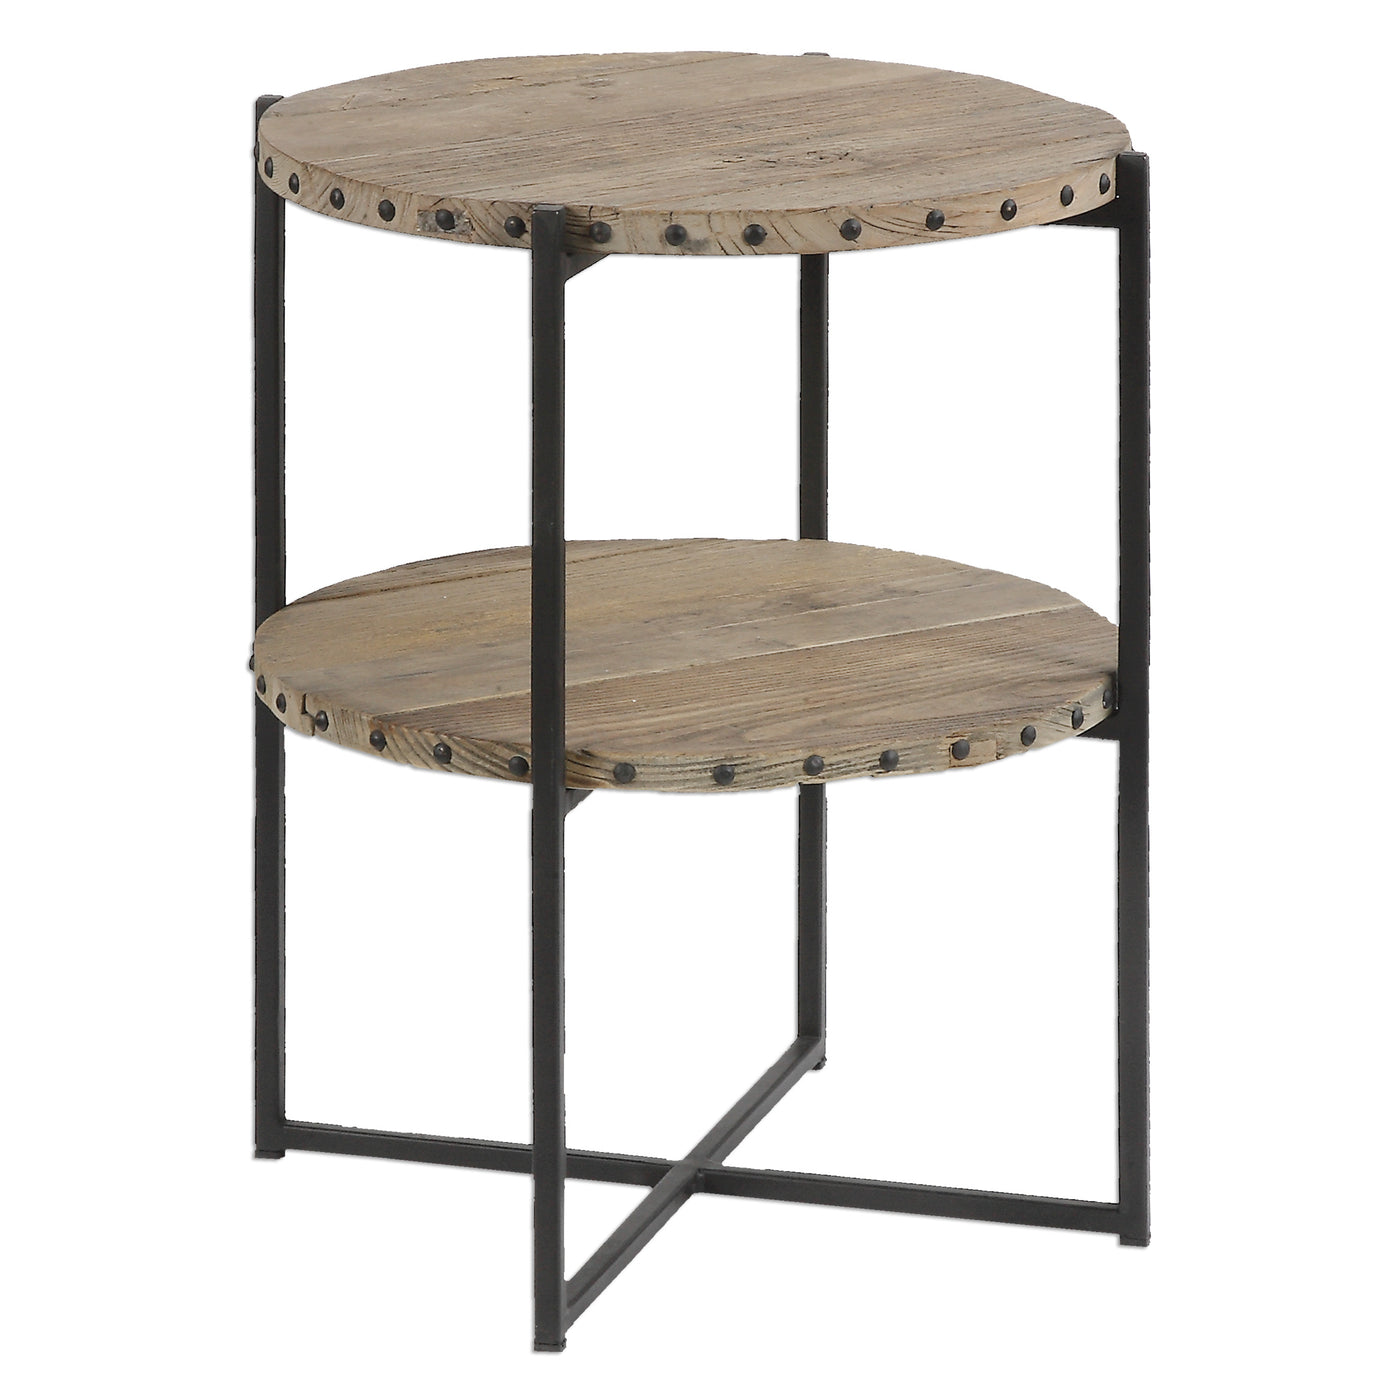 Double Layered Table Features Recycled Elm Wood Accented With Nail Details On An Iron Frame. Solid Wood Will Continue To M...